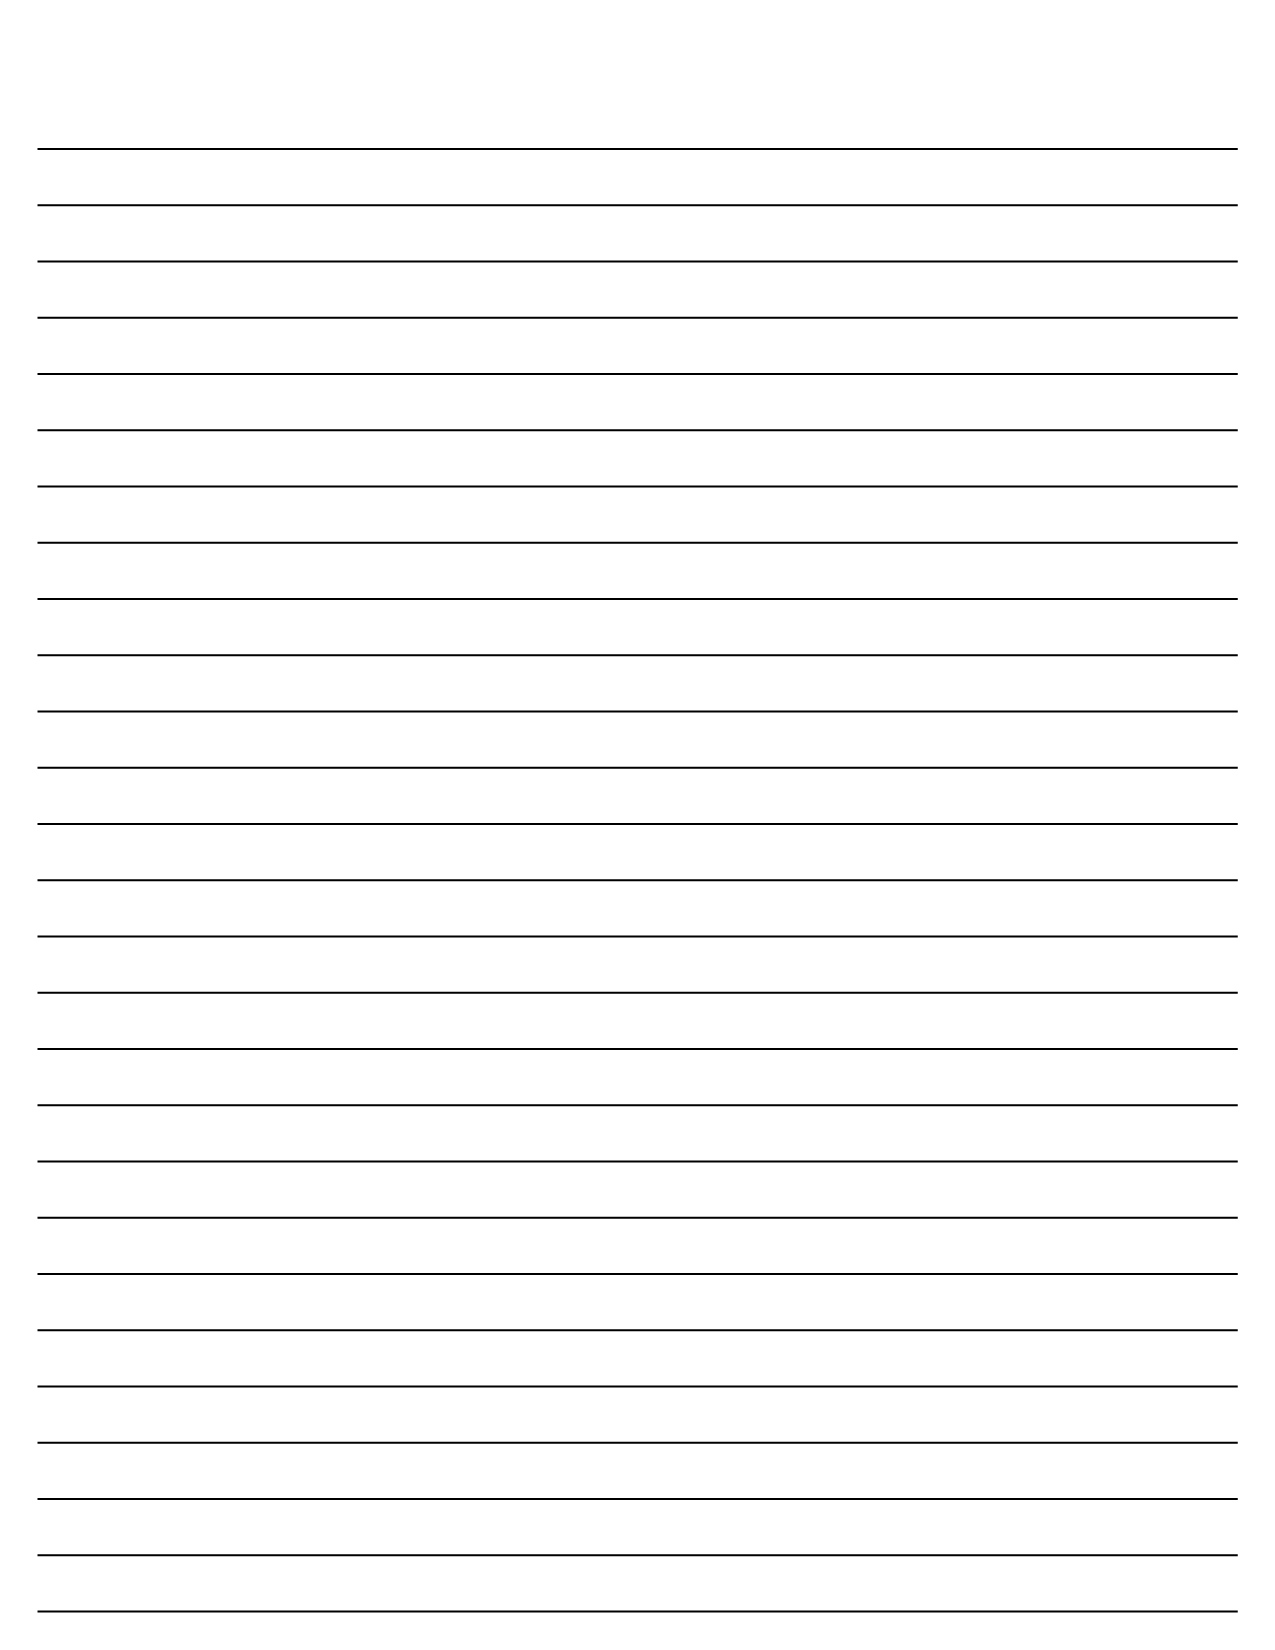 Lined Paper To Print For Kids